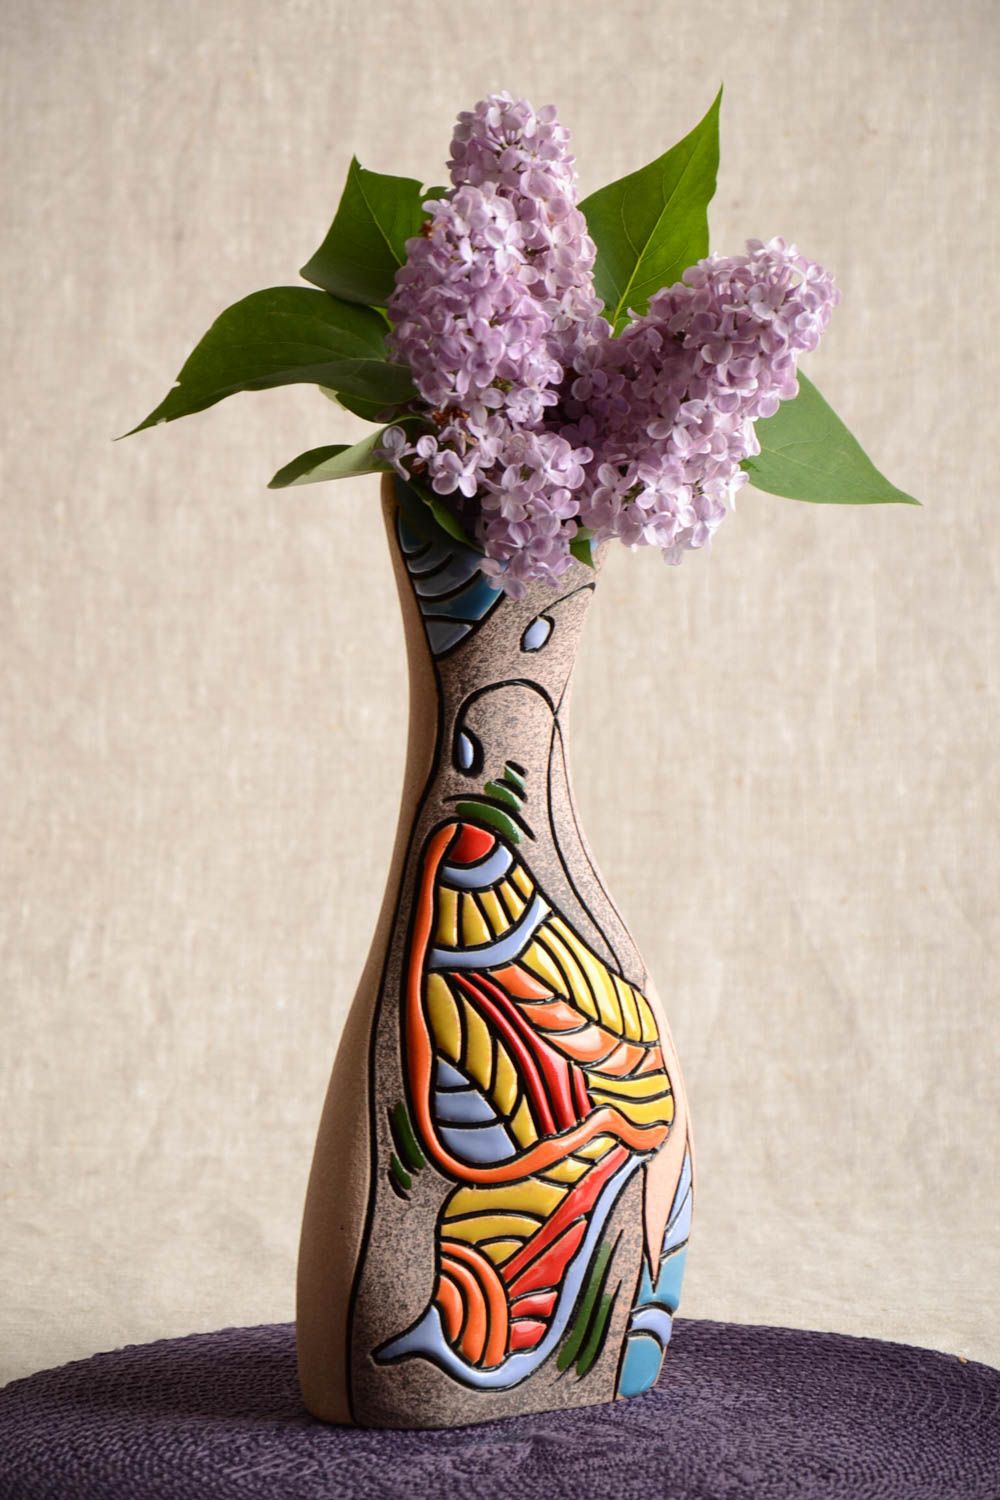 13 inches unusual shape ceramic vase for home décor in art style 2 lb photo 1